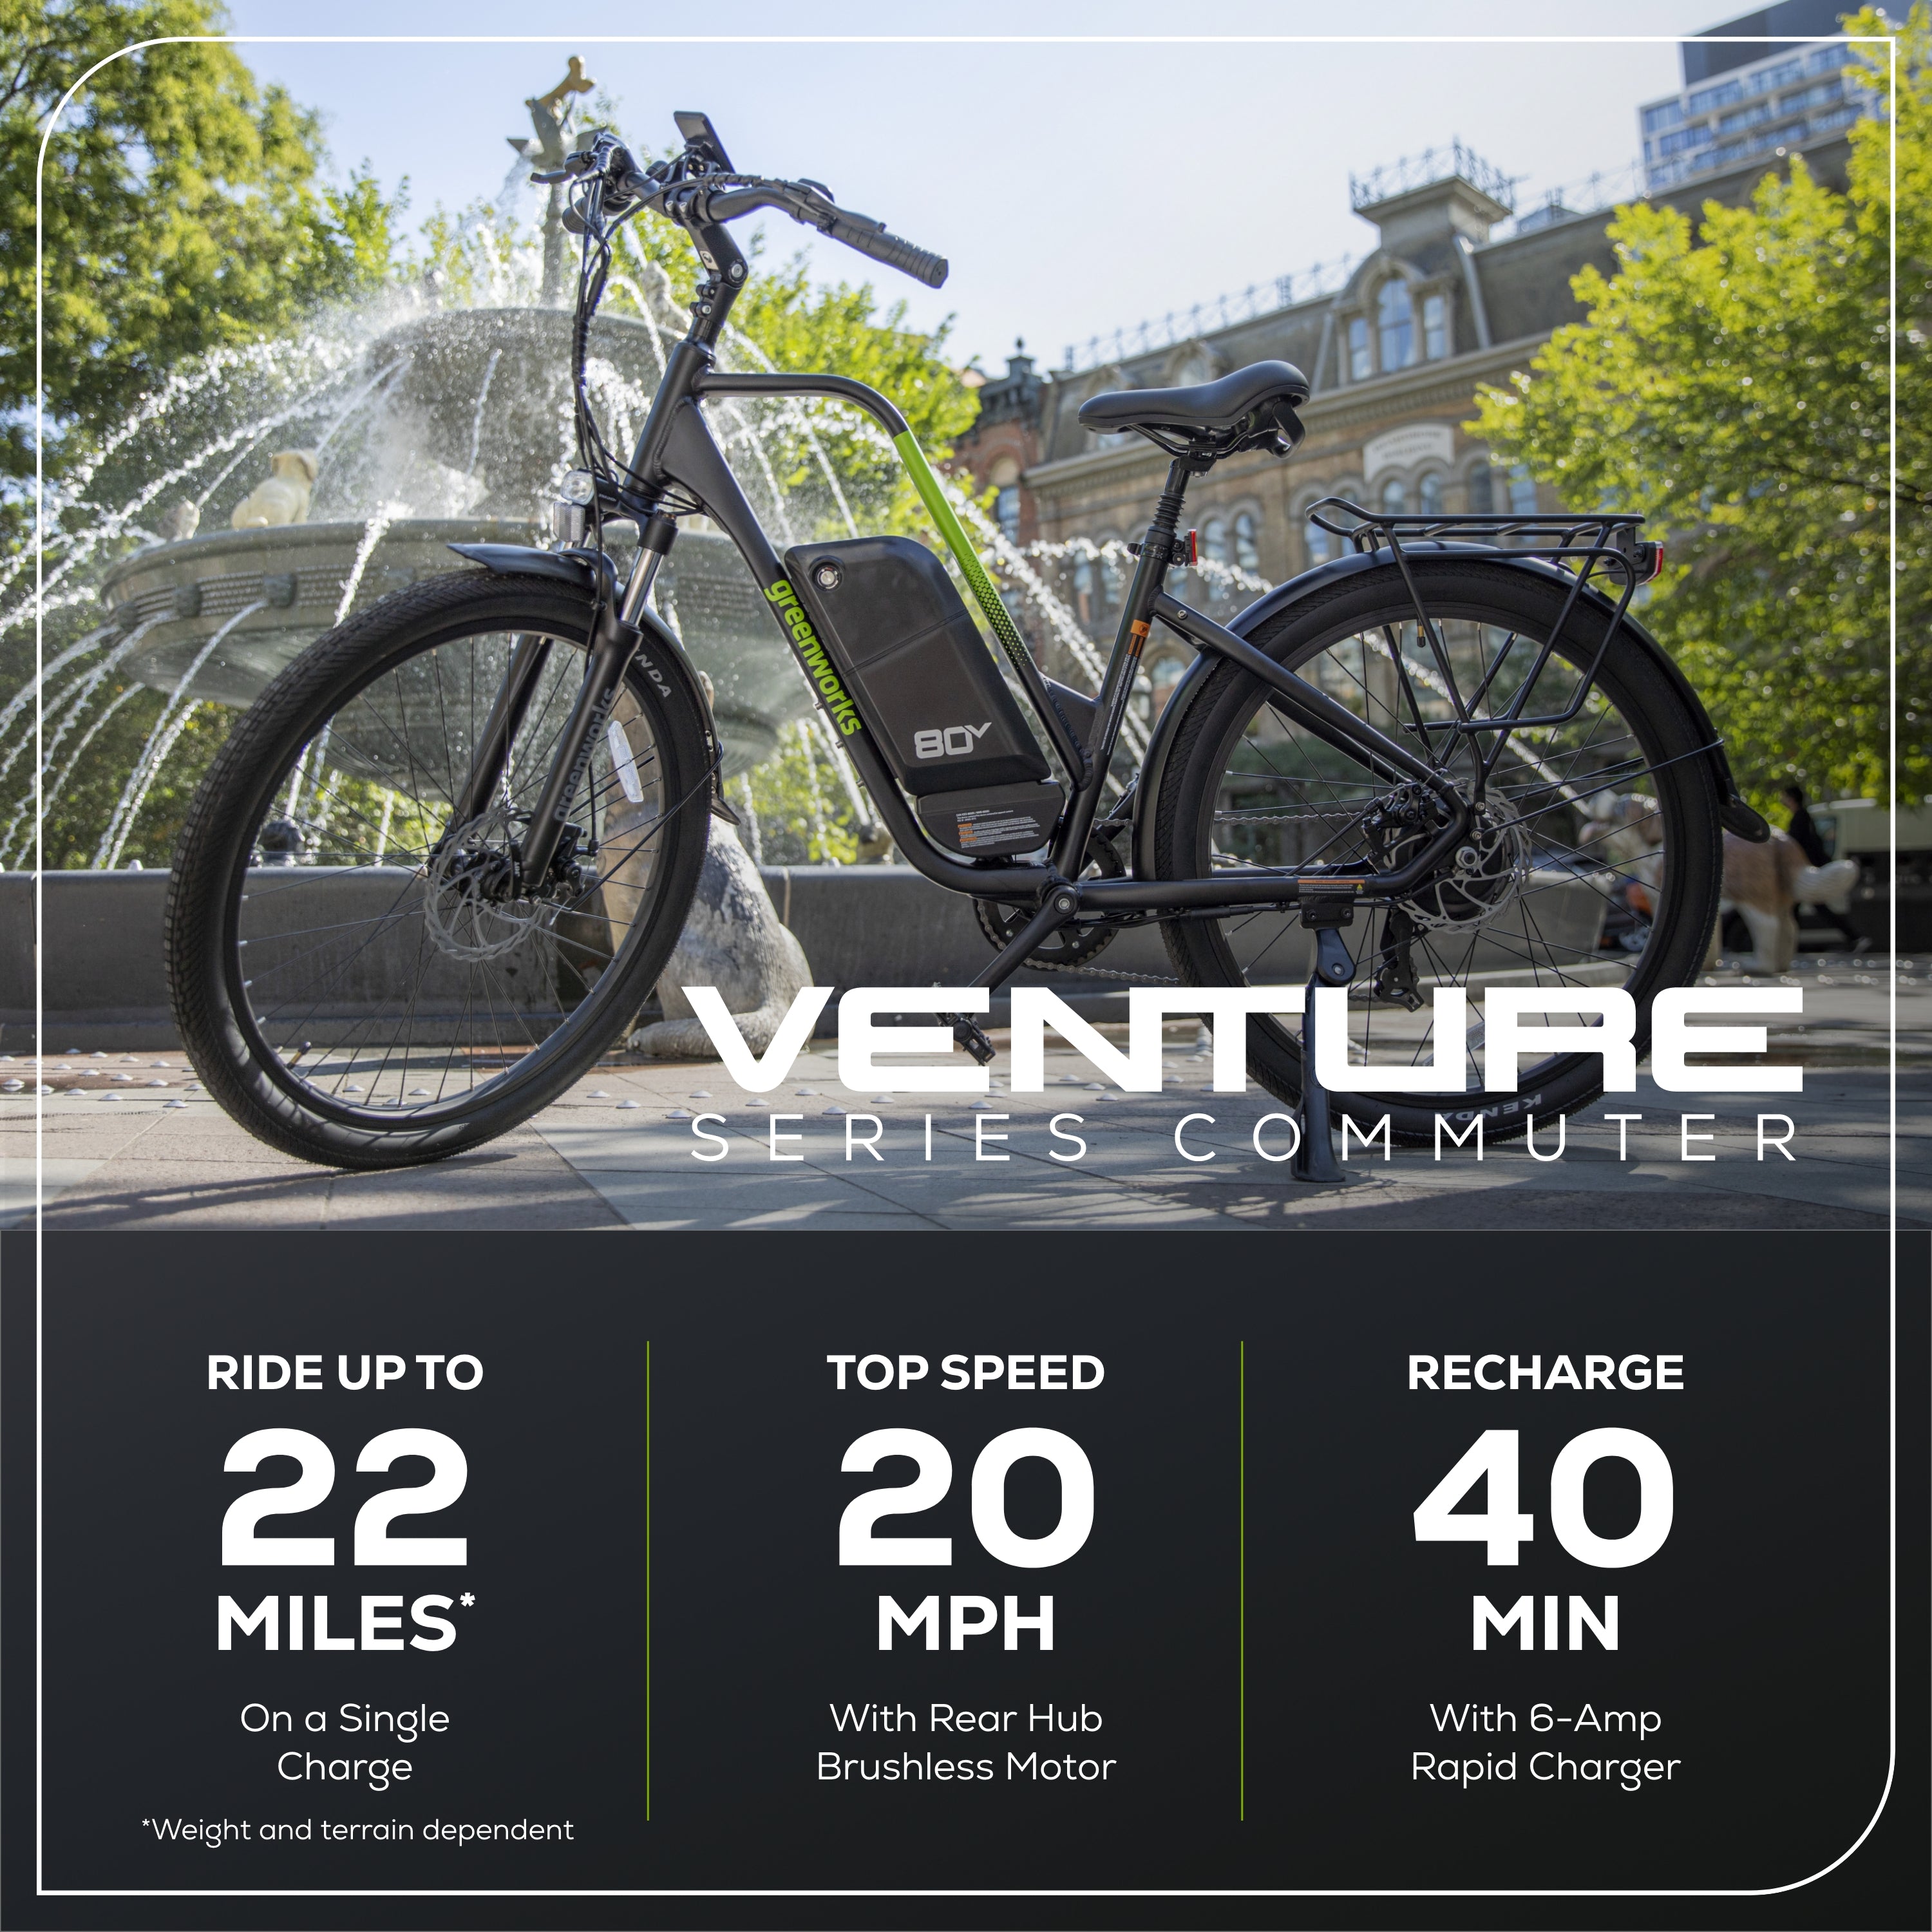 80V VENTURE Series 27.5” Electric Commuter Bike w/ 4Ah Battery and Charger